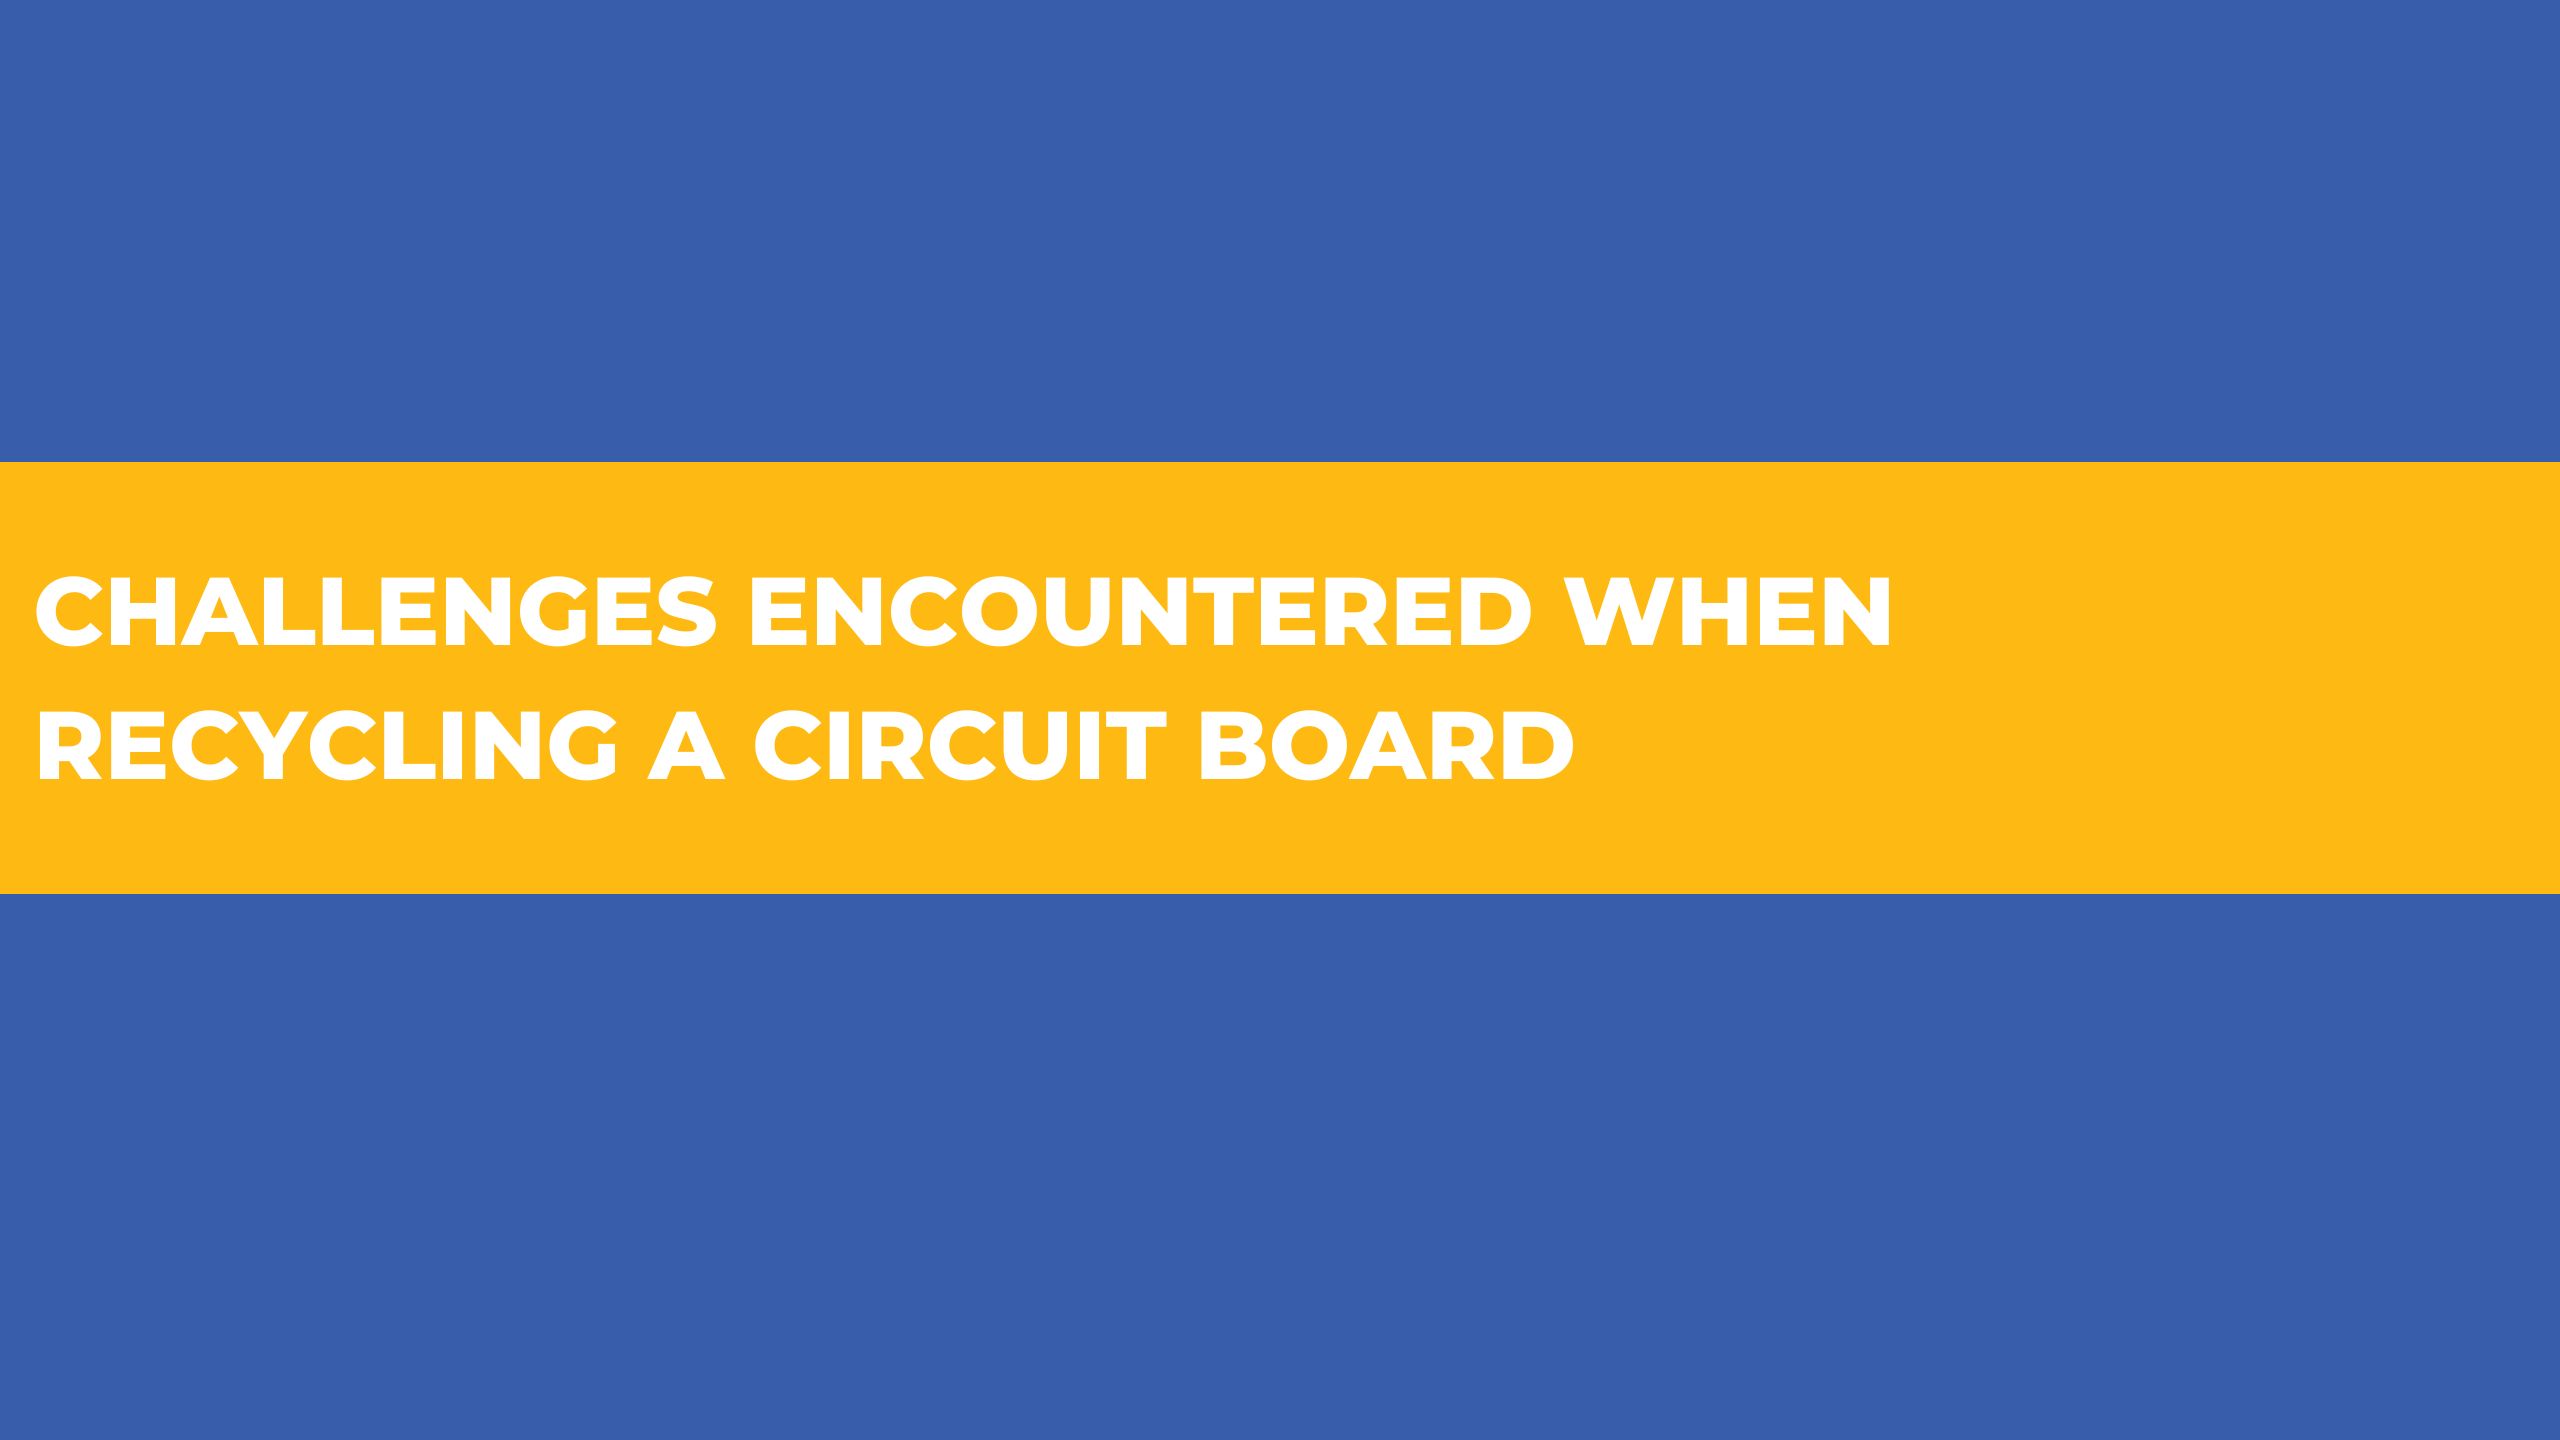 Challenges encountered when recycling a circuit board.